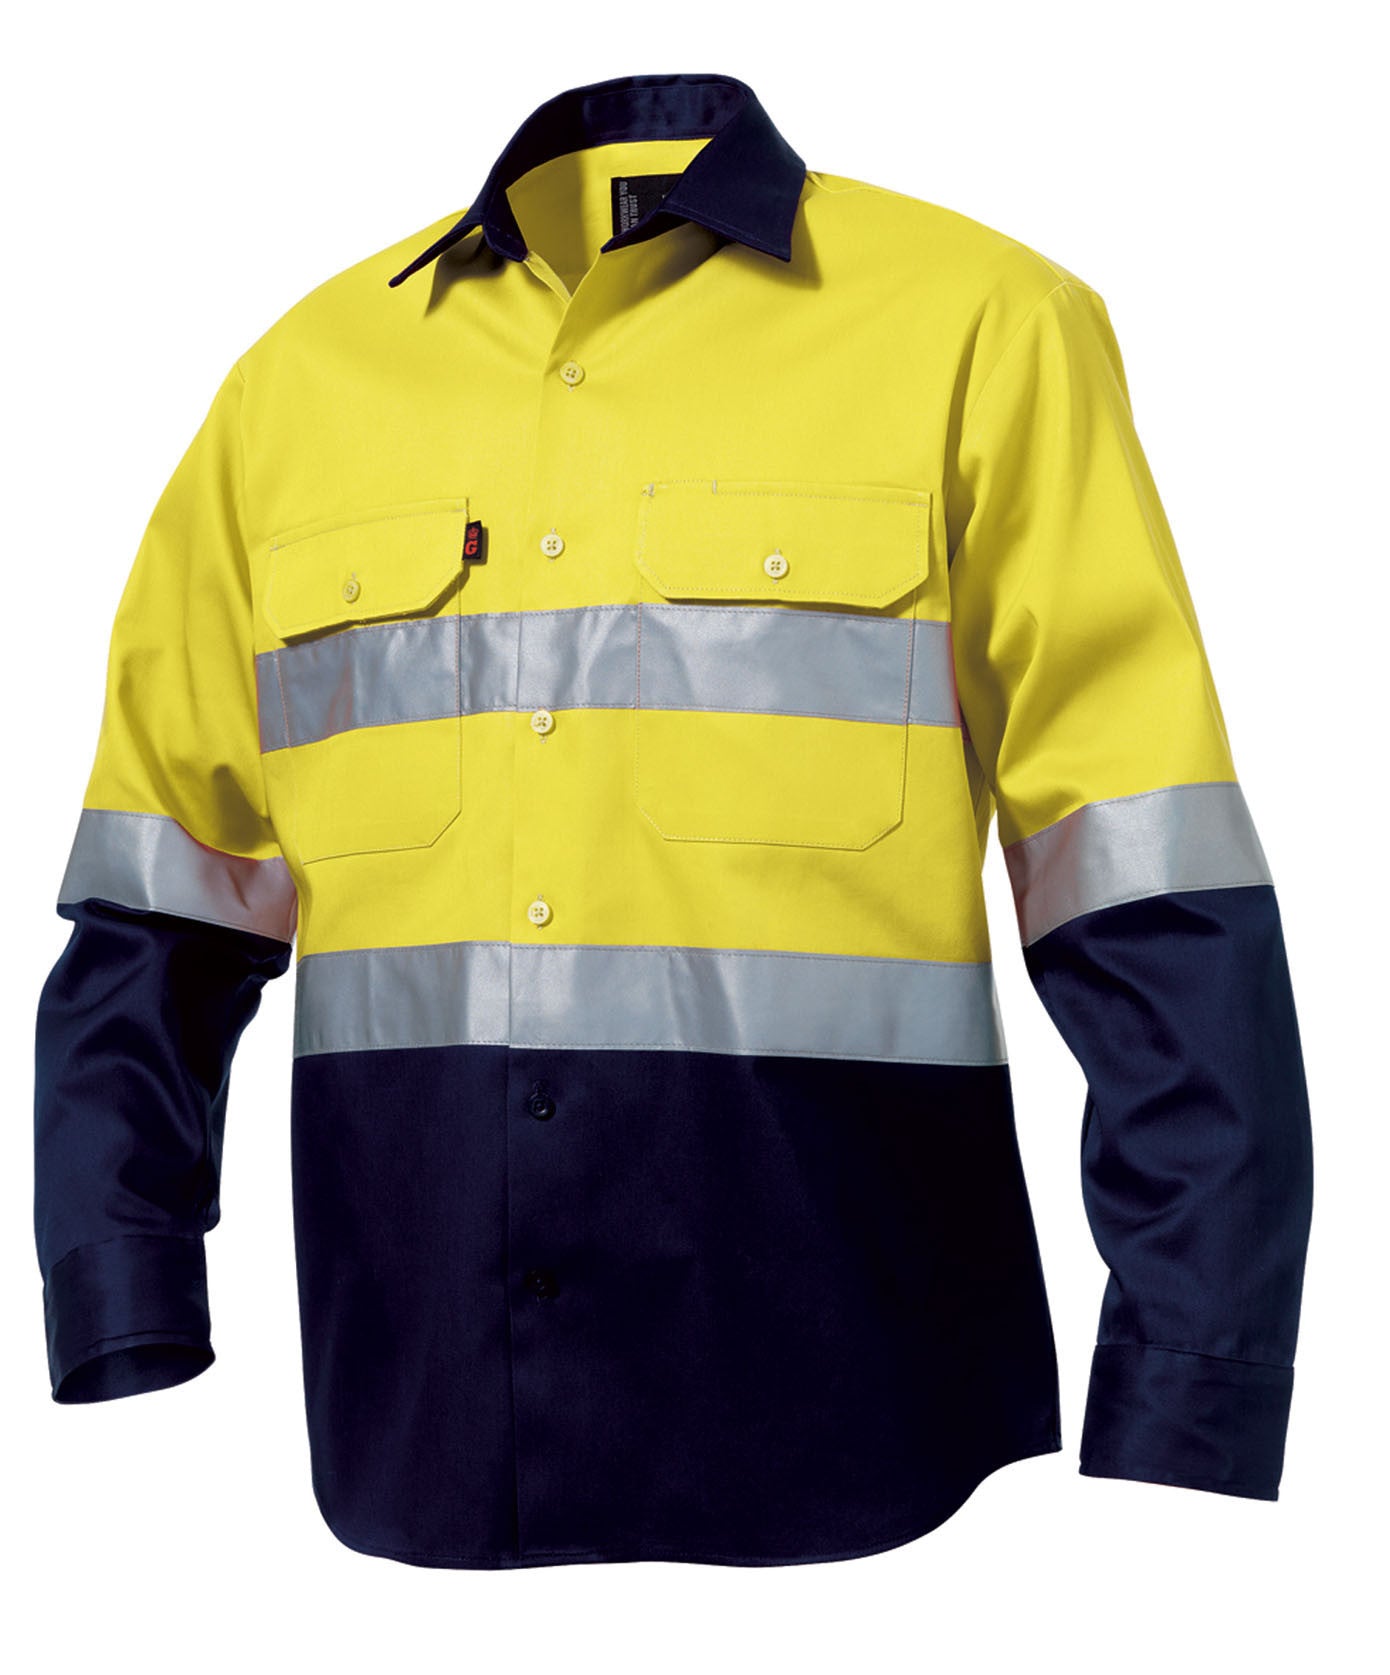 King Gee-King Gee L/s Hi-vis Open Front Spliced Reflect Shirt with Hi Vis Tape-Yellow/Navy / S-Uniform Wholesalers - 3